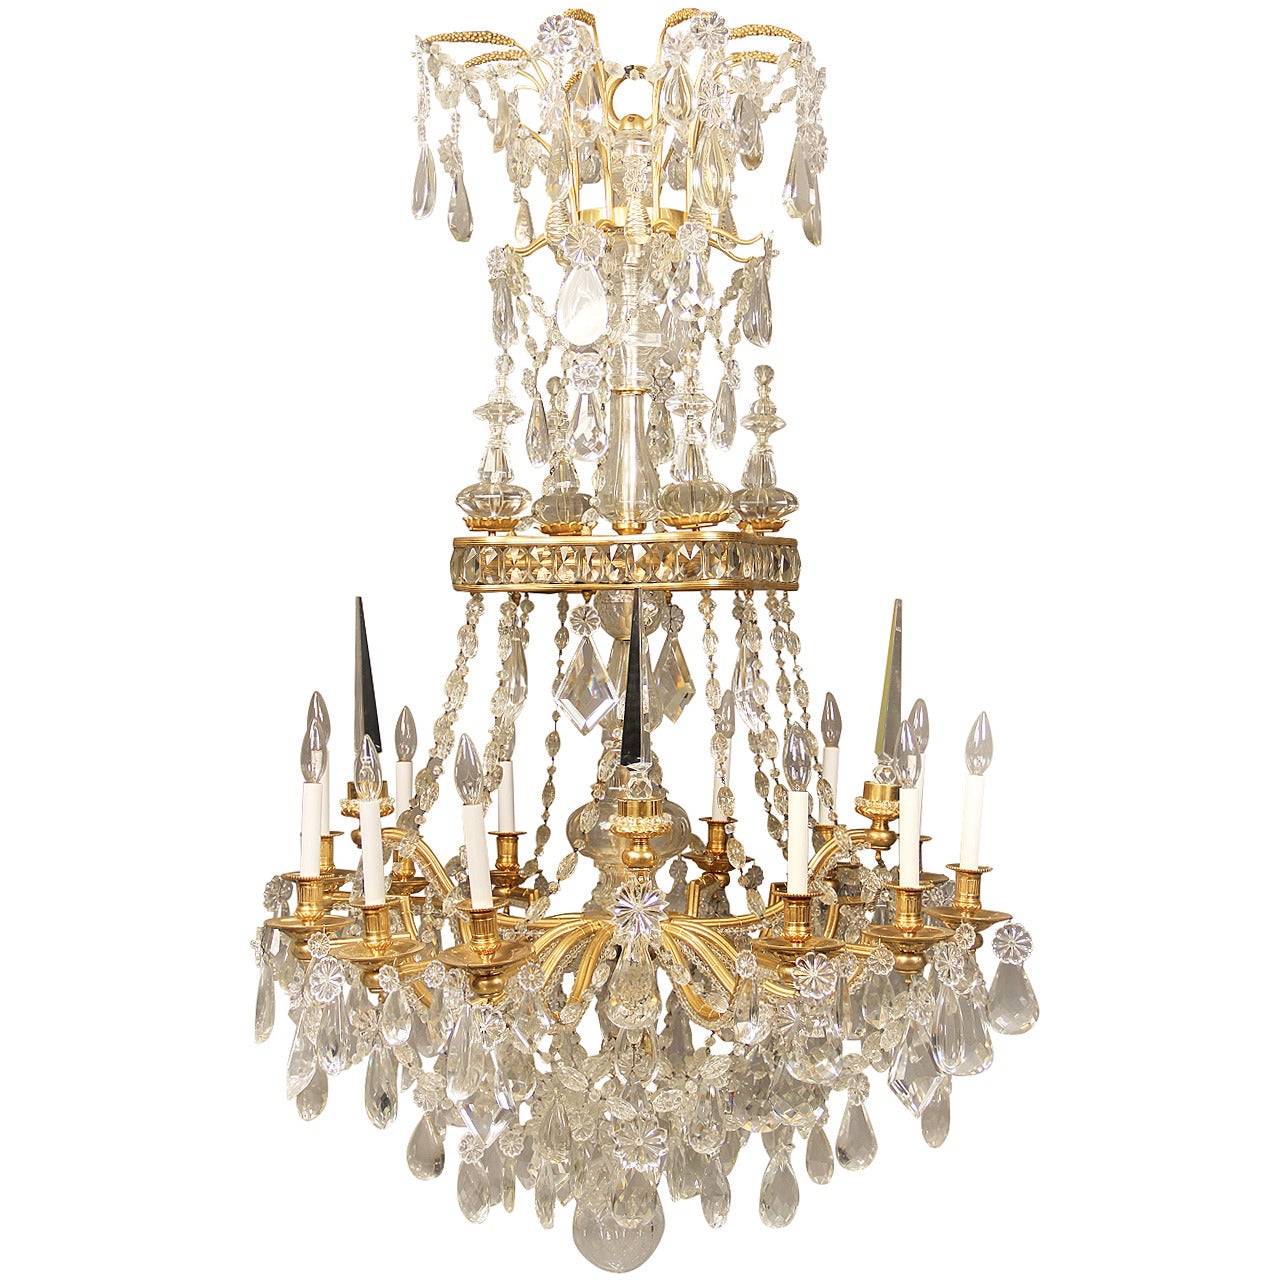 Very Fine and Special Mid-19th Century Baccarat Crystal Chandelier For Sale